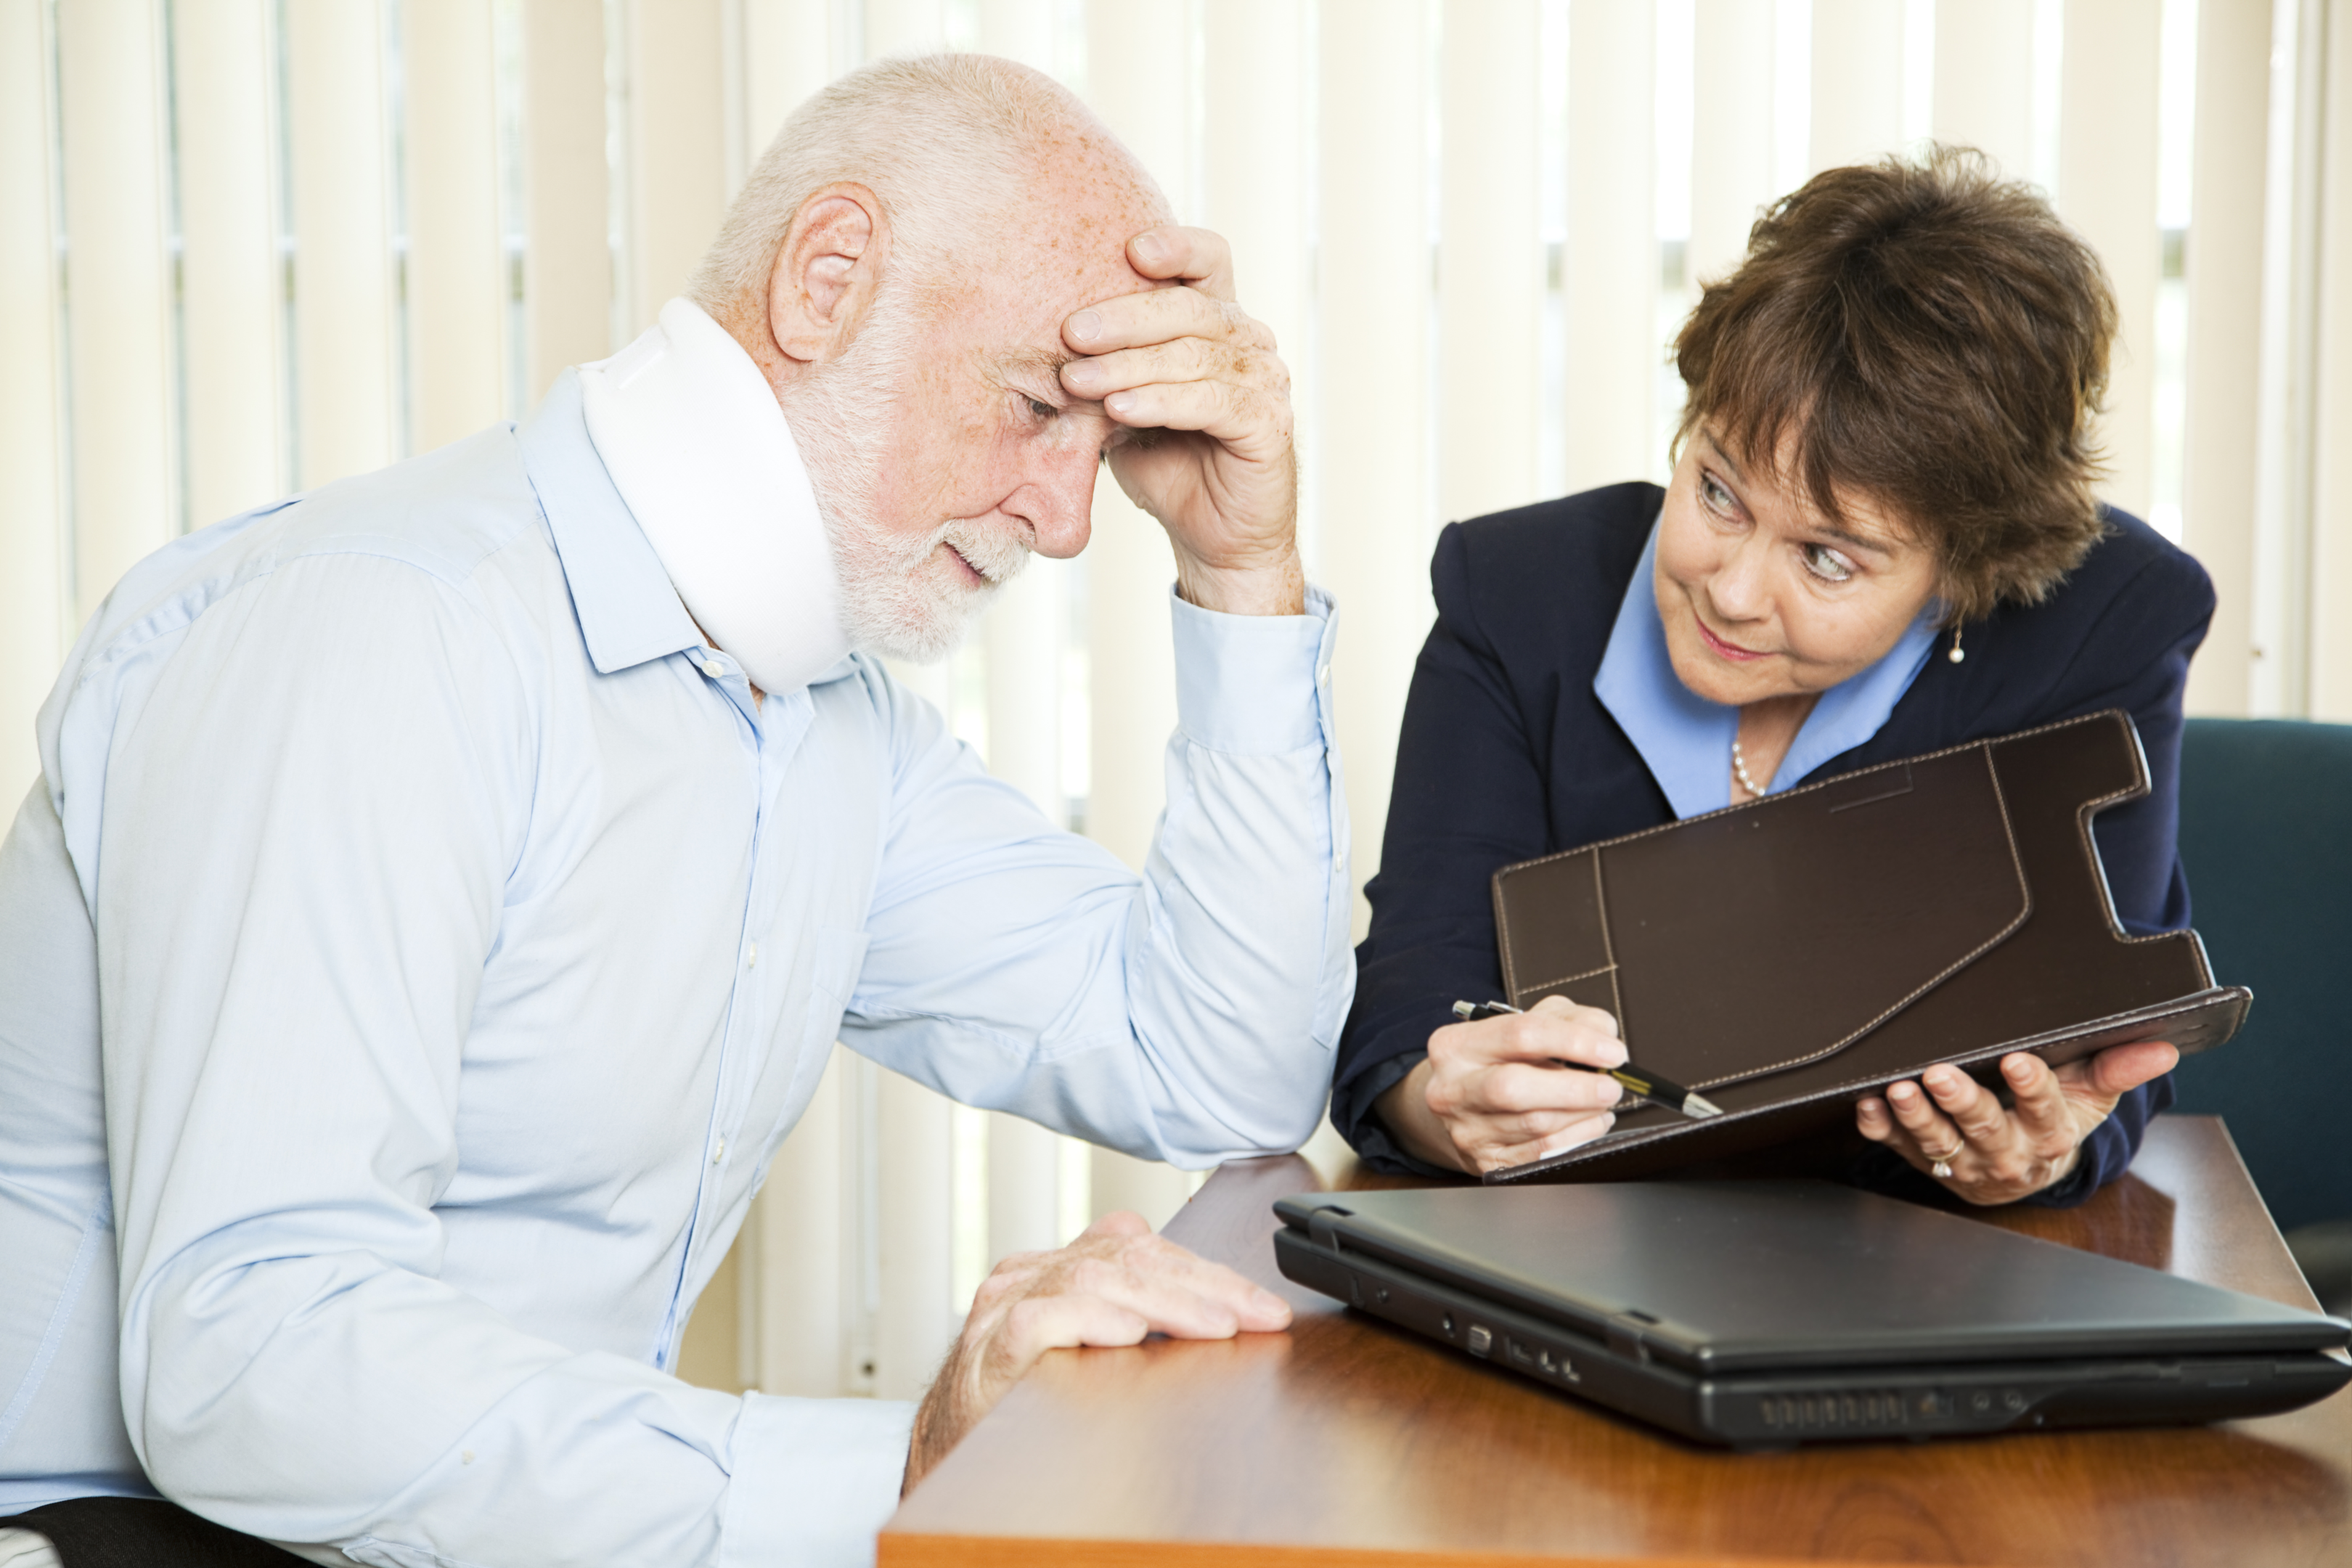 Finding a Personal Injury Lawyer